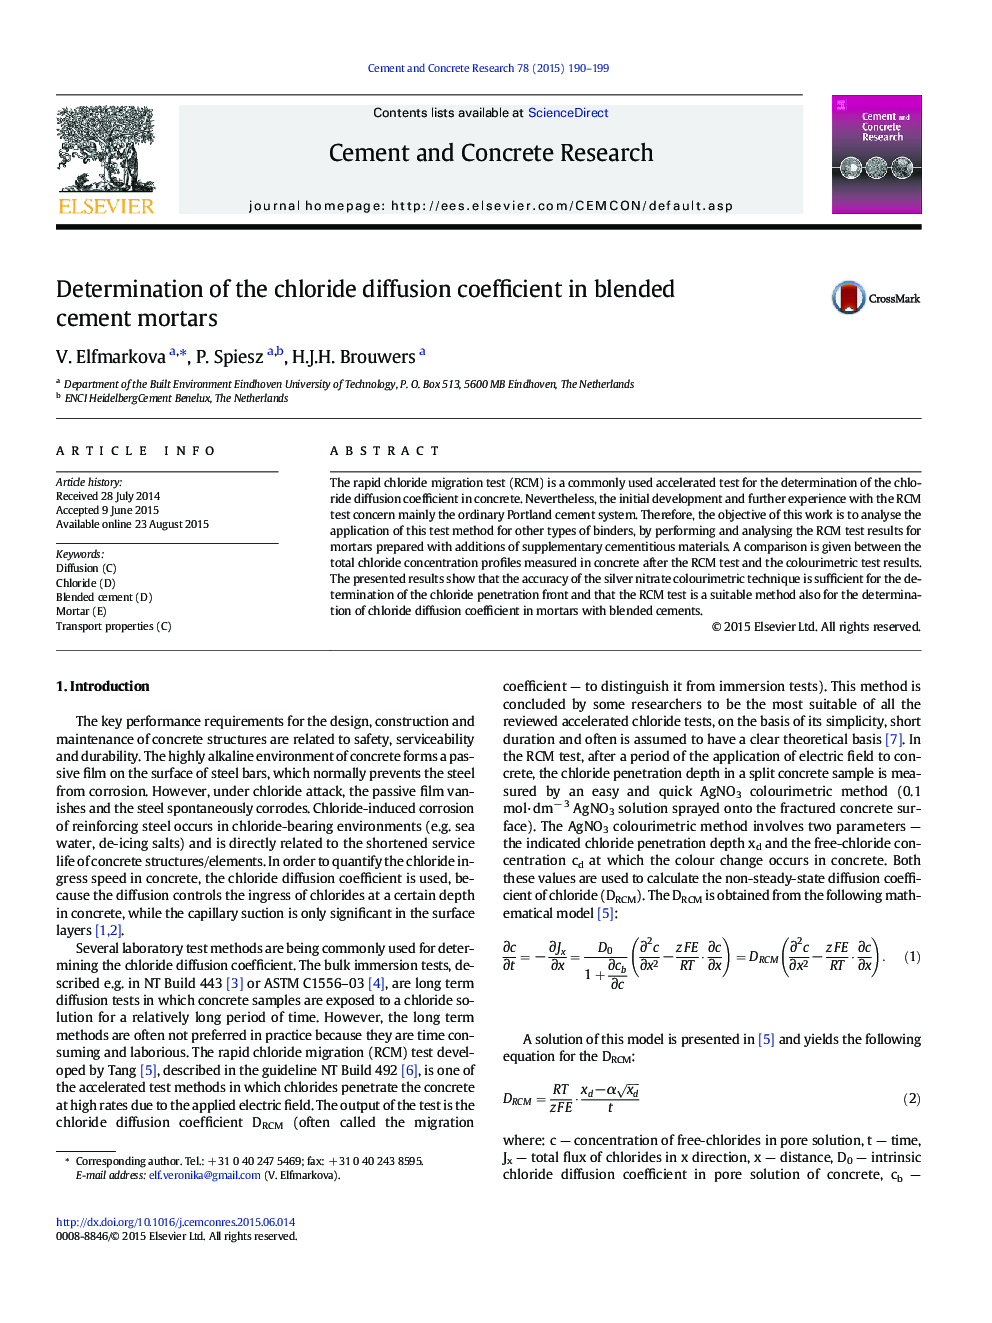 Determination of the chloride diffusion coefficient in blended cement mortars